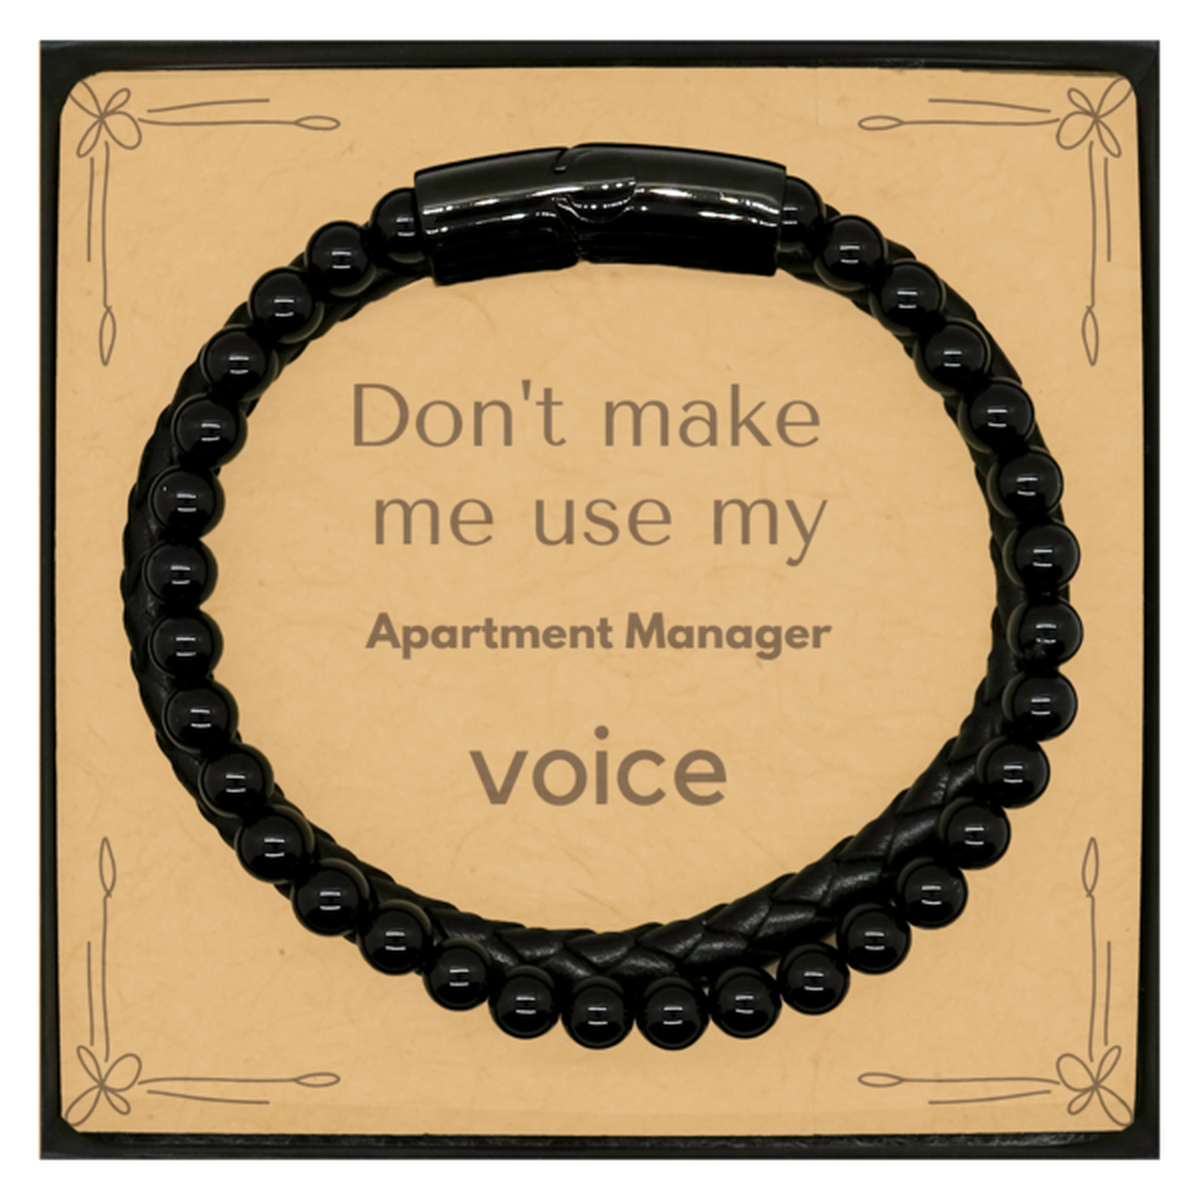 Don't make me use my Apartment Manager voice, Sarcasm Apartment Manager Card Gifts, Christmas Apartment Manager Stone Leather Bracelets Birthday Unique Gifts For Apartment Manager Coworkers, Men, Women, Colleague, Friends